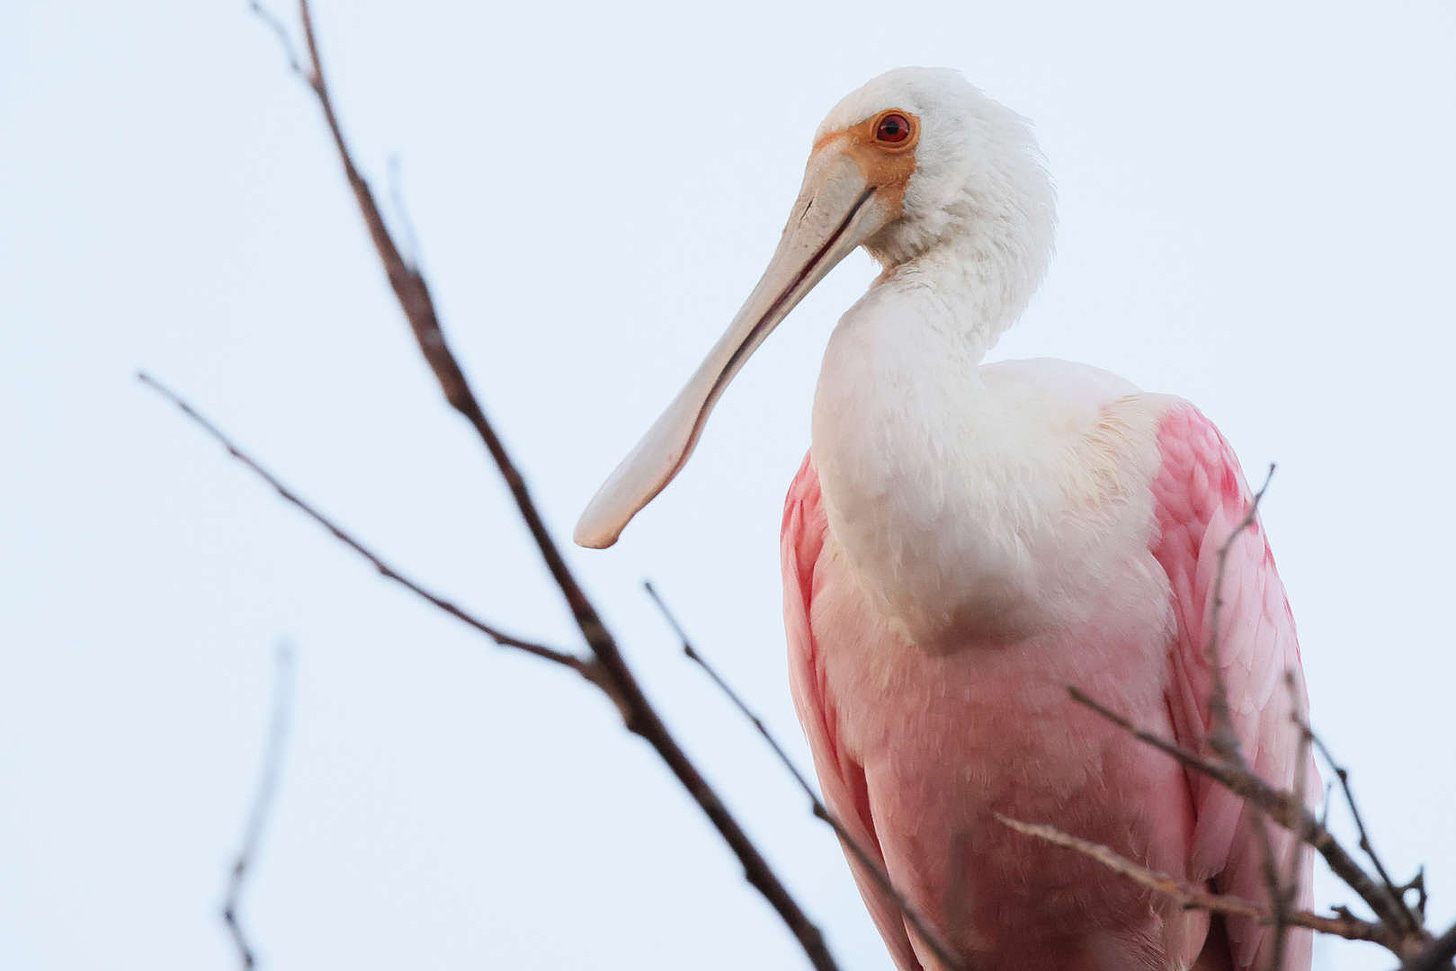 Roseate spoonbills typically inhabit Texas, Florida, Central America and South America. The individual pictured here is not the one seen in Wisconsin.